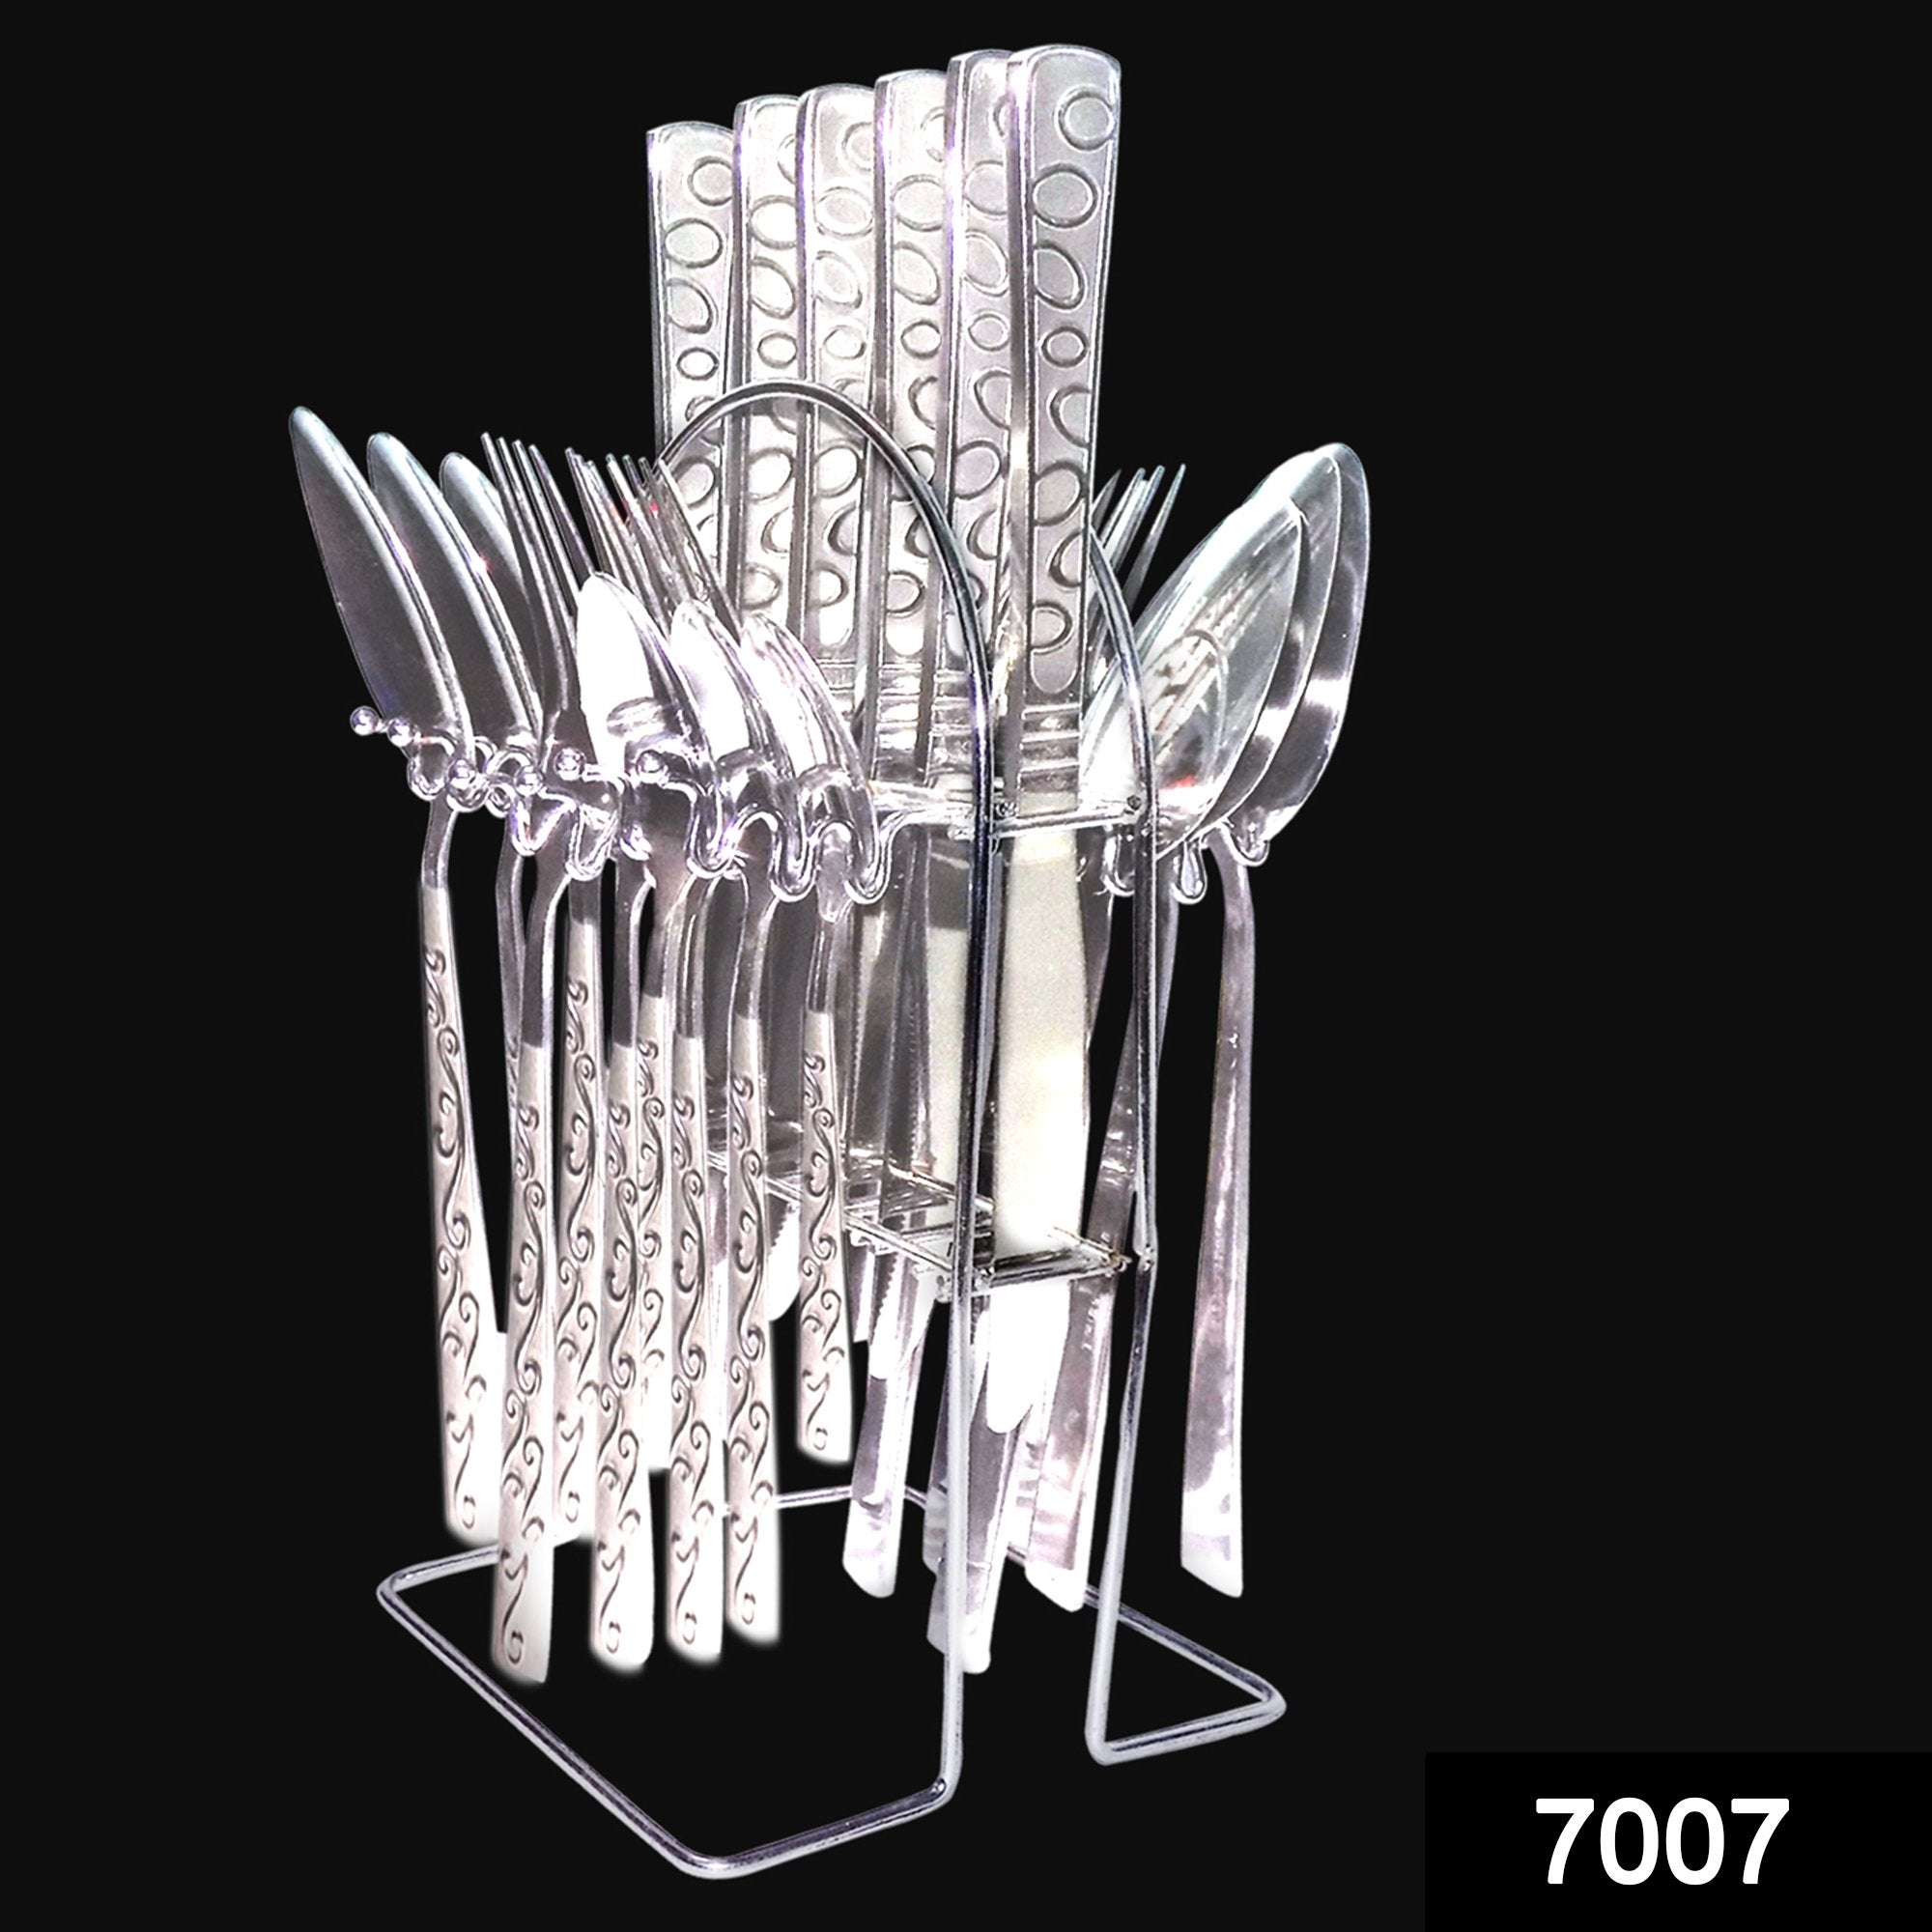 7007 Stainless Steel Stylish Cutlery Set with Spoons, Forks, Butter Knives for Stylish Dining (Set of 24 Pcs) - SkyShopy